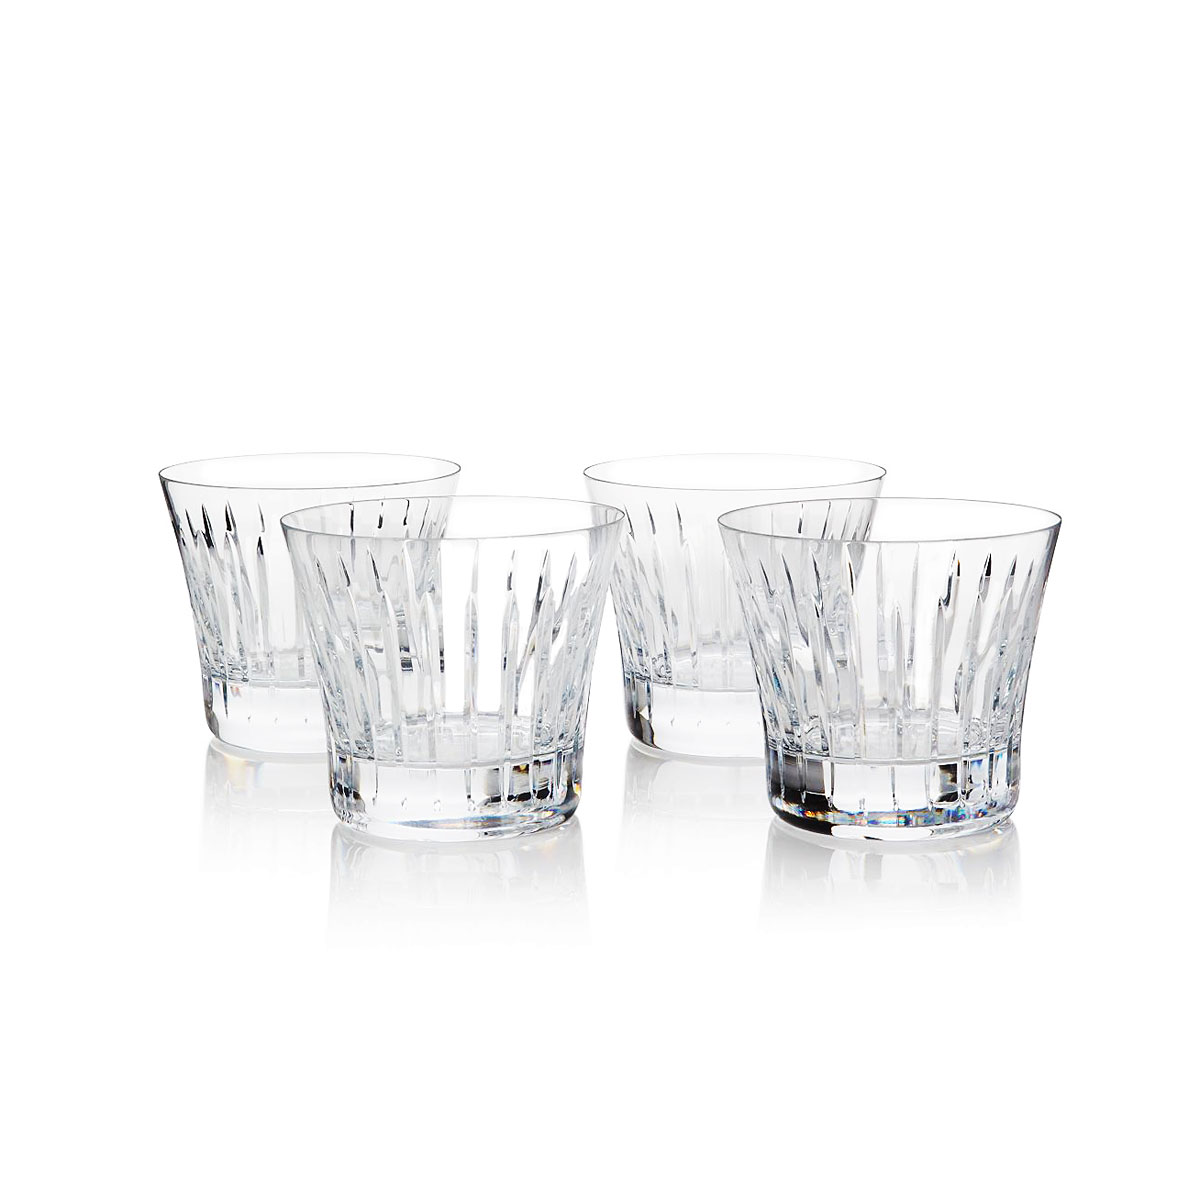 Baccarat Symphony Boxed Gift Set of 4 Tumblers